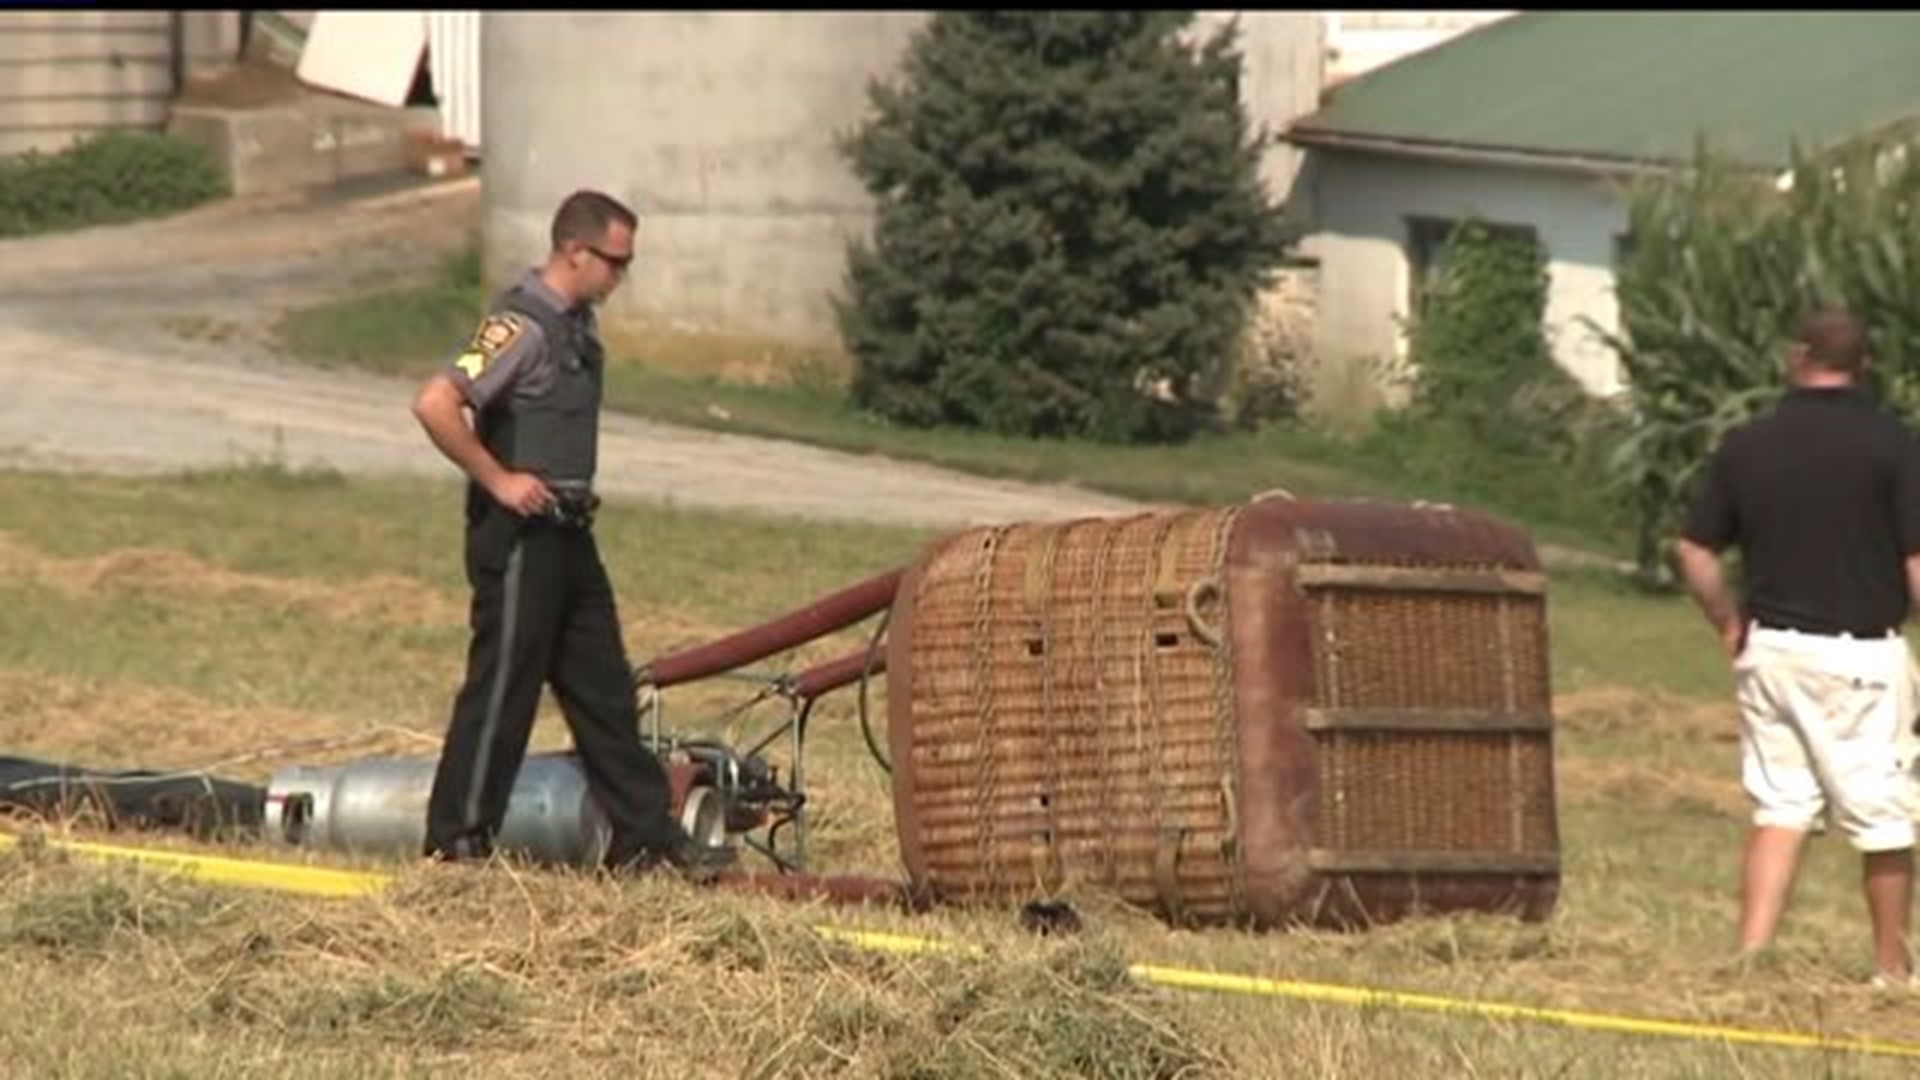 Two are still recovering after Lancaster county hot air balloon accident